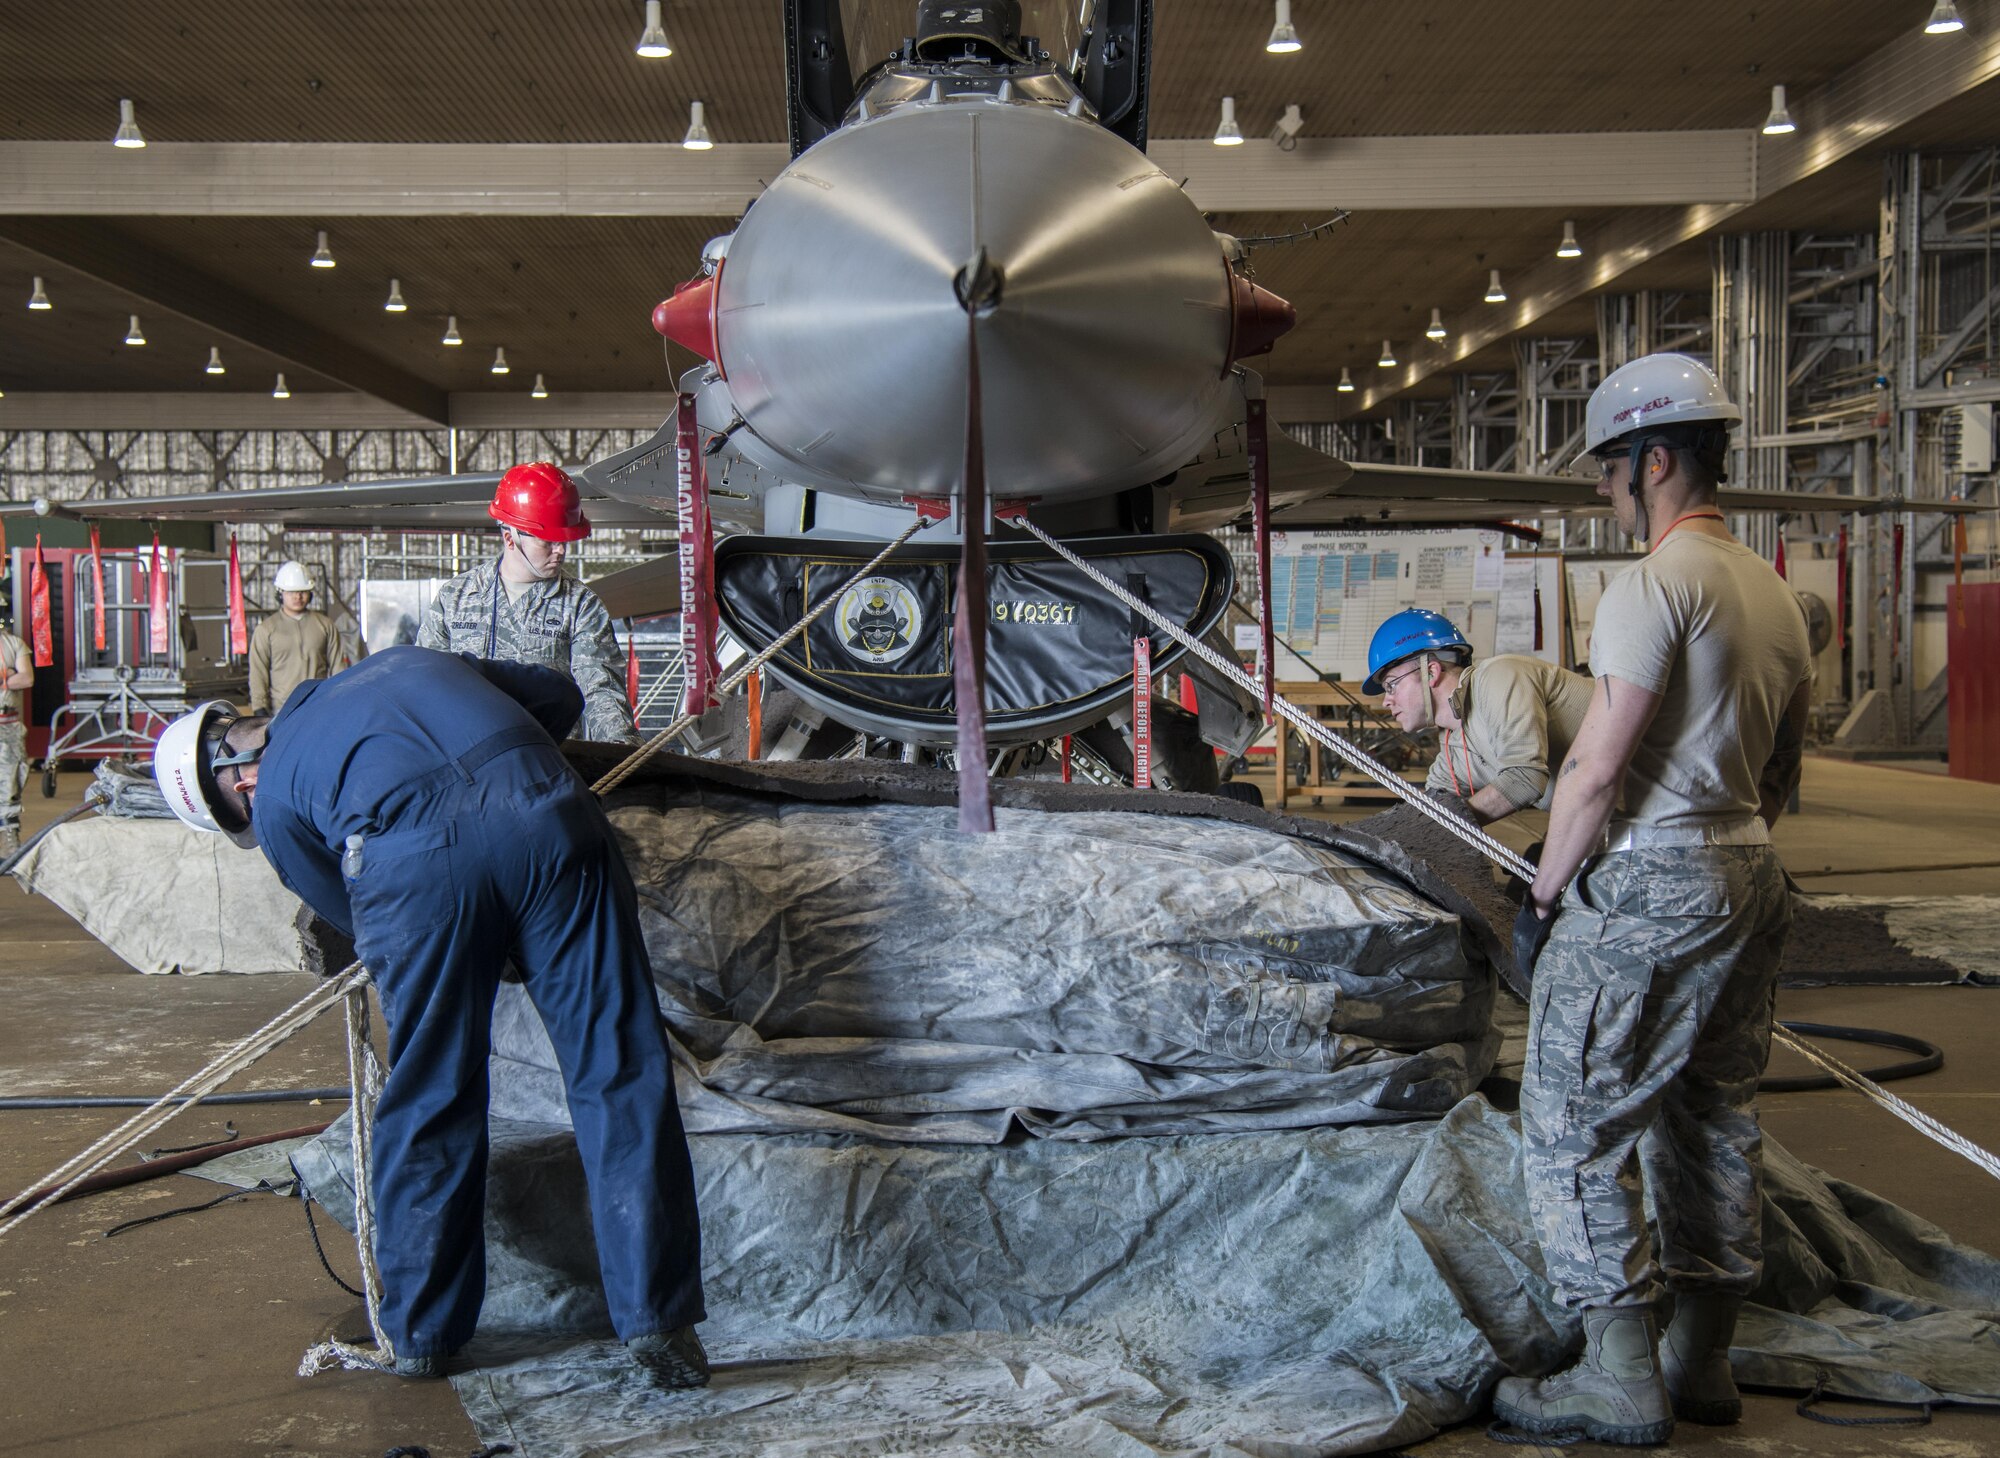 Airmen with the 35th Maintenance Squadron crashed, damaged, disabled aircraft recovery unit center a lifting bag while being inflated on a pallet build up at Misawa Air Base, Japan, Jan. 28, 2017. These Airmen respond to aircraft incidents when an aircraft needs to be lifted to retract landing gear or moved off an active runway, enabling normal mission operations to resume. (U.S. Air Force photo by Senior Airman Brittany A. Chase)